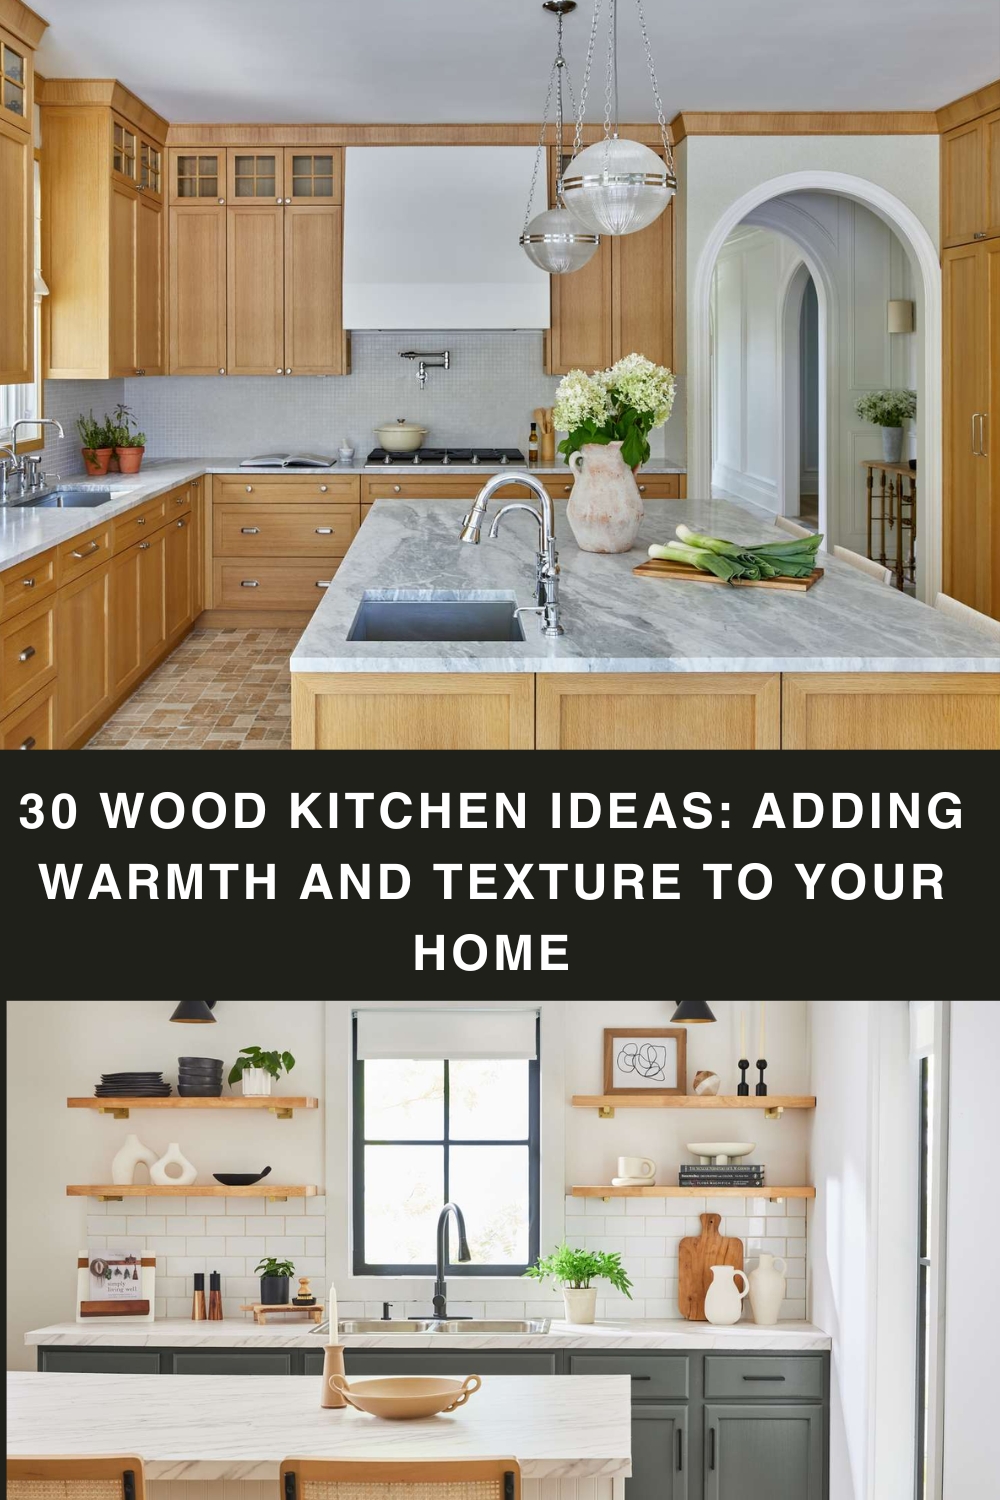 30 Wood Kitchen Ideas: Adding Warmth and Texture to Your Home pin